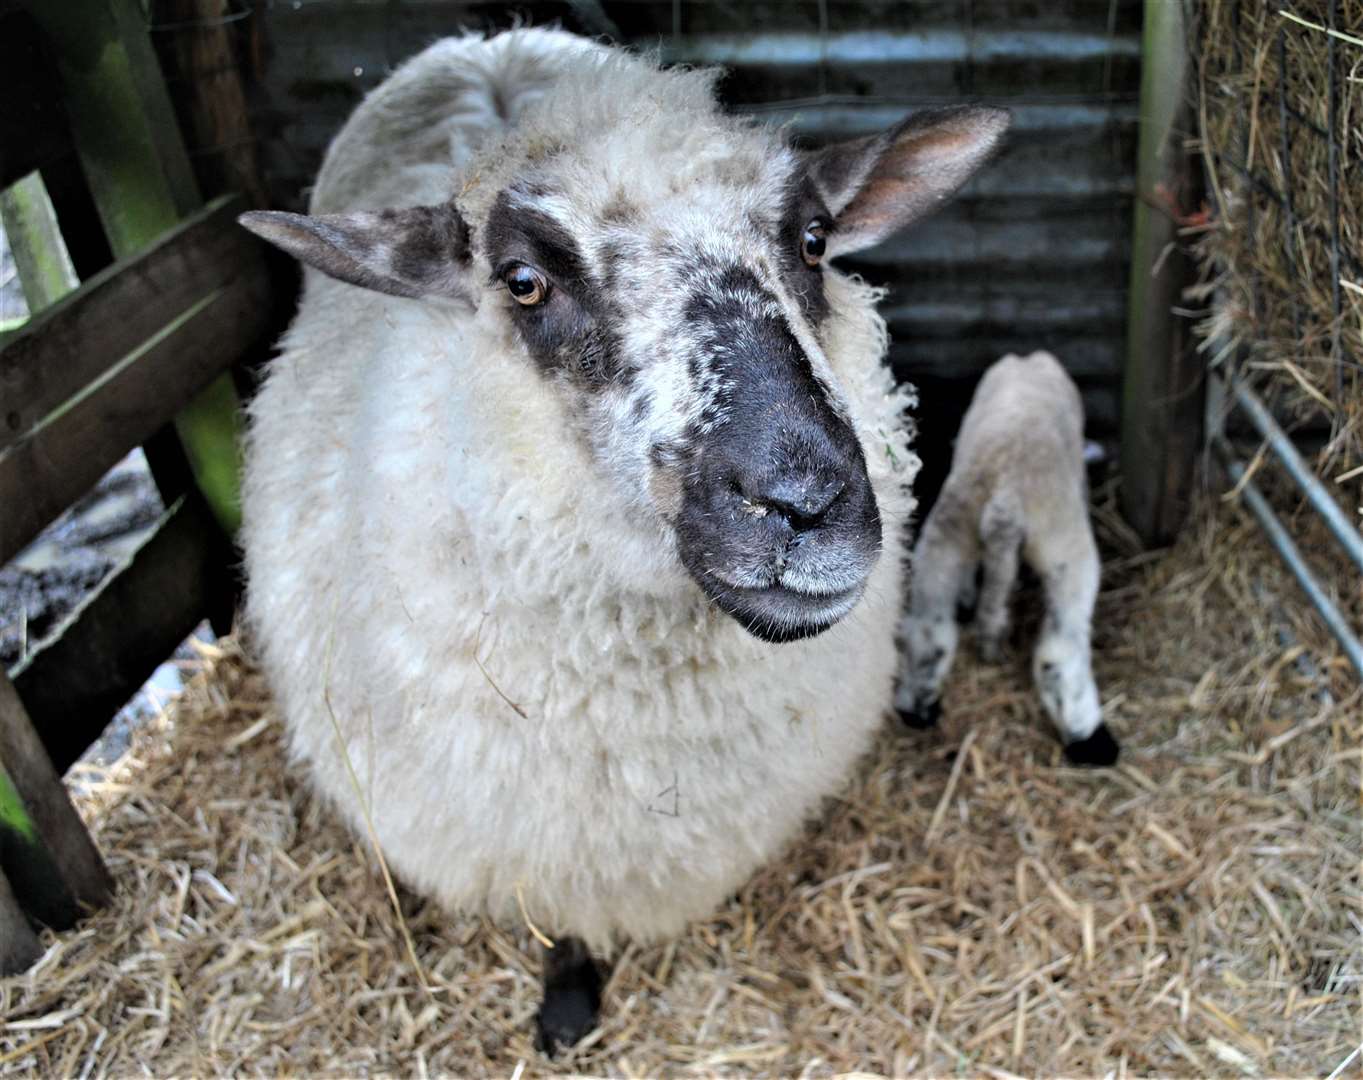 Veronica the sheep with her newborn lamb, still bears the scars of her ordeal